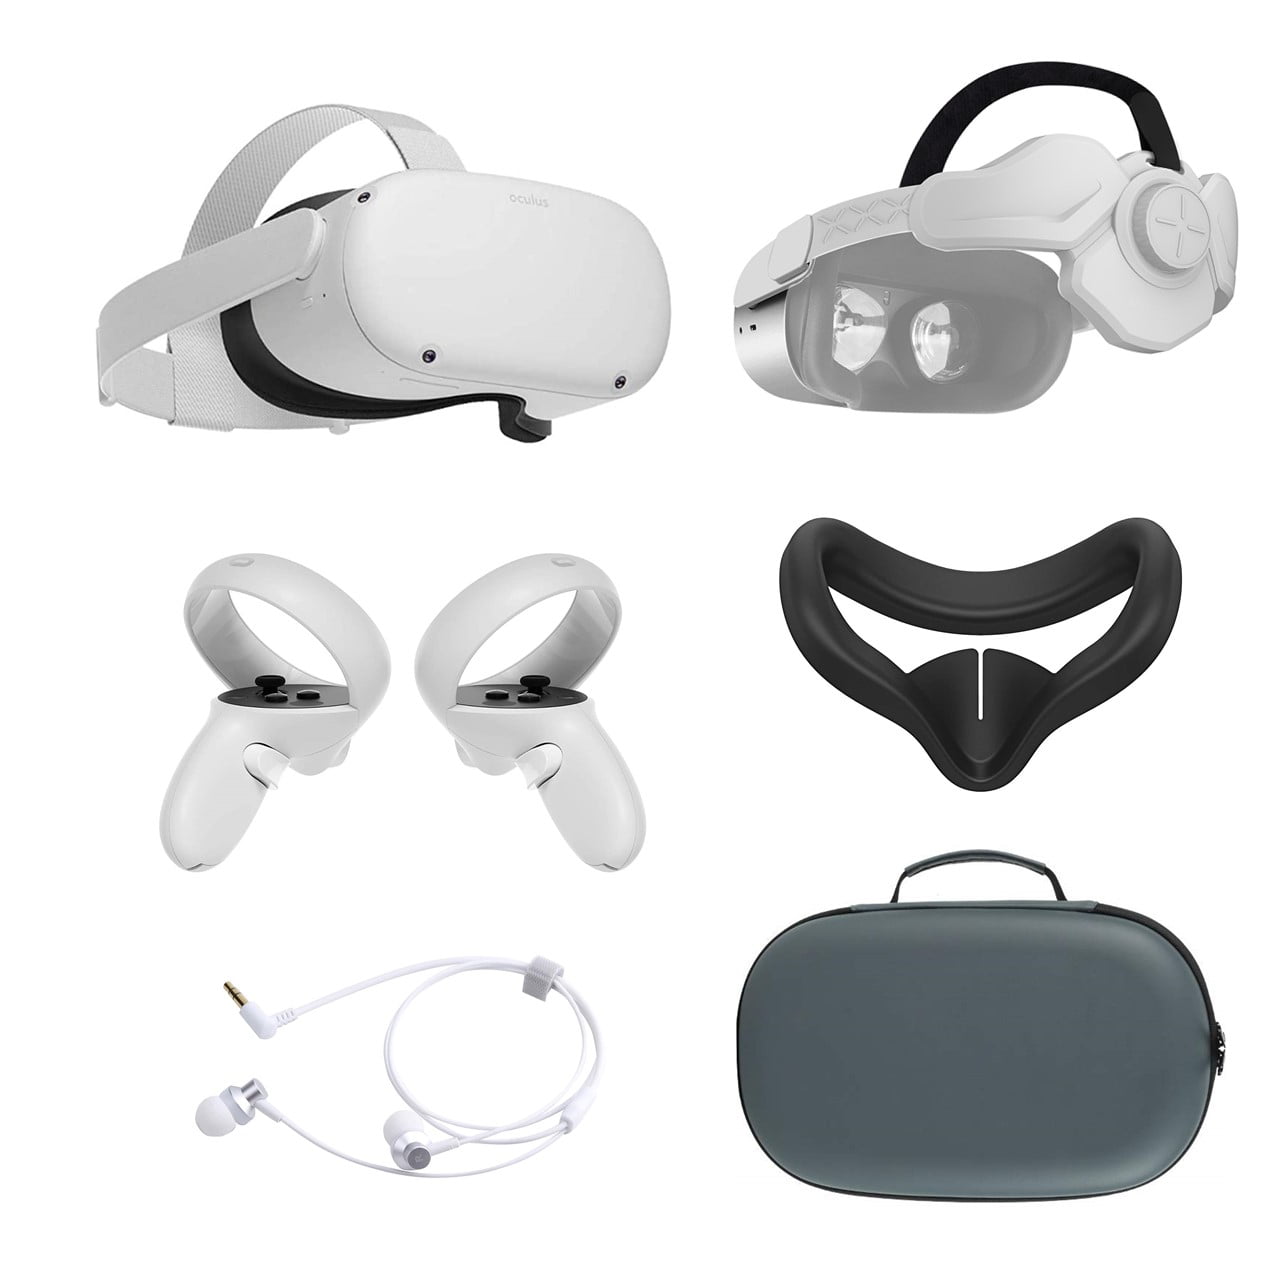 2021 Oculus Quest 2 All-In-One VR Headset, Touch Controllers, 256GB SSD,  1832x1920 up to 90 Hz Refresh Rate LCD, 3D Audio, Mytrix Head Strap,  Carrying Case, Earphone - Walmart.com